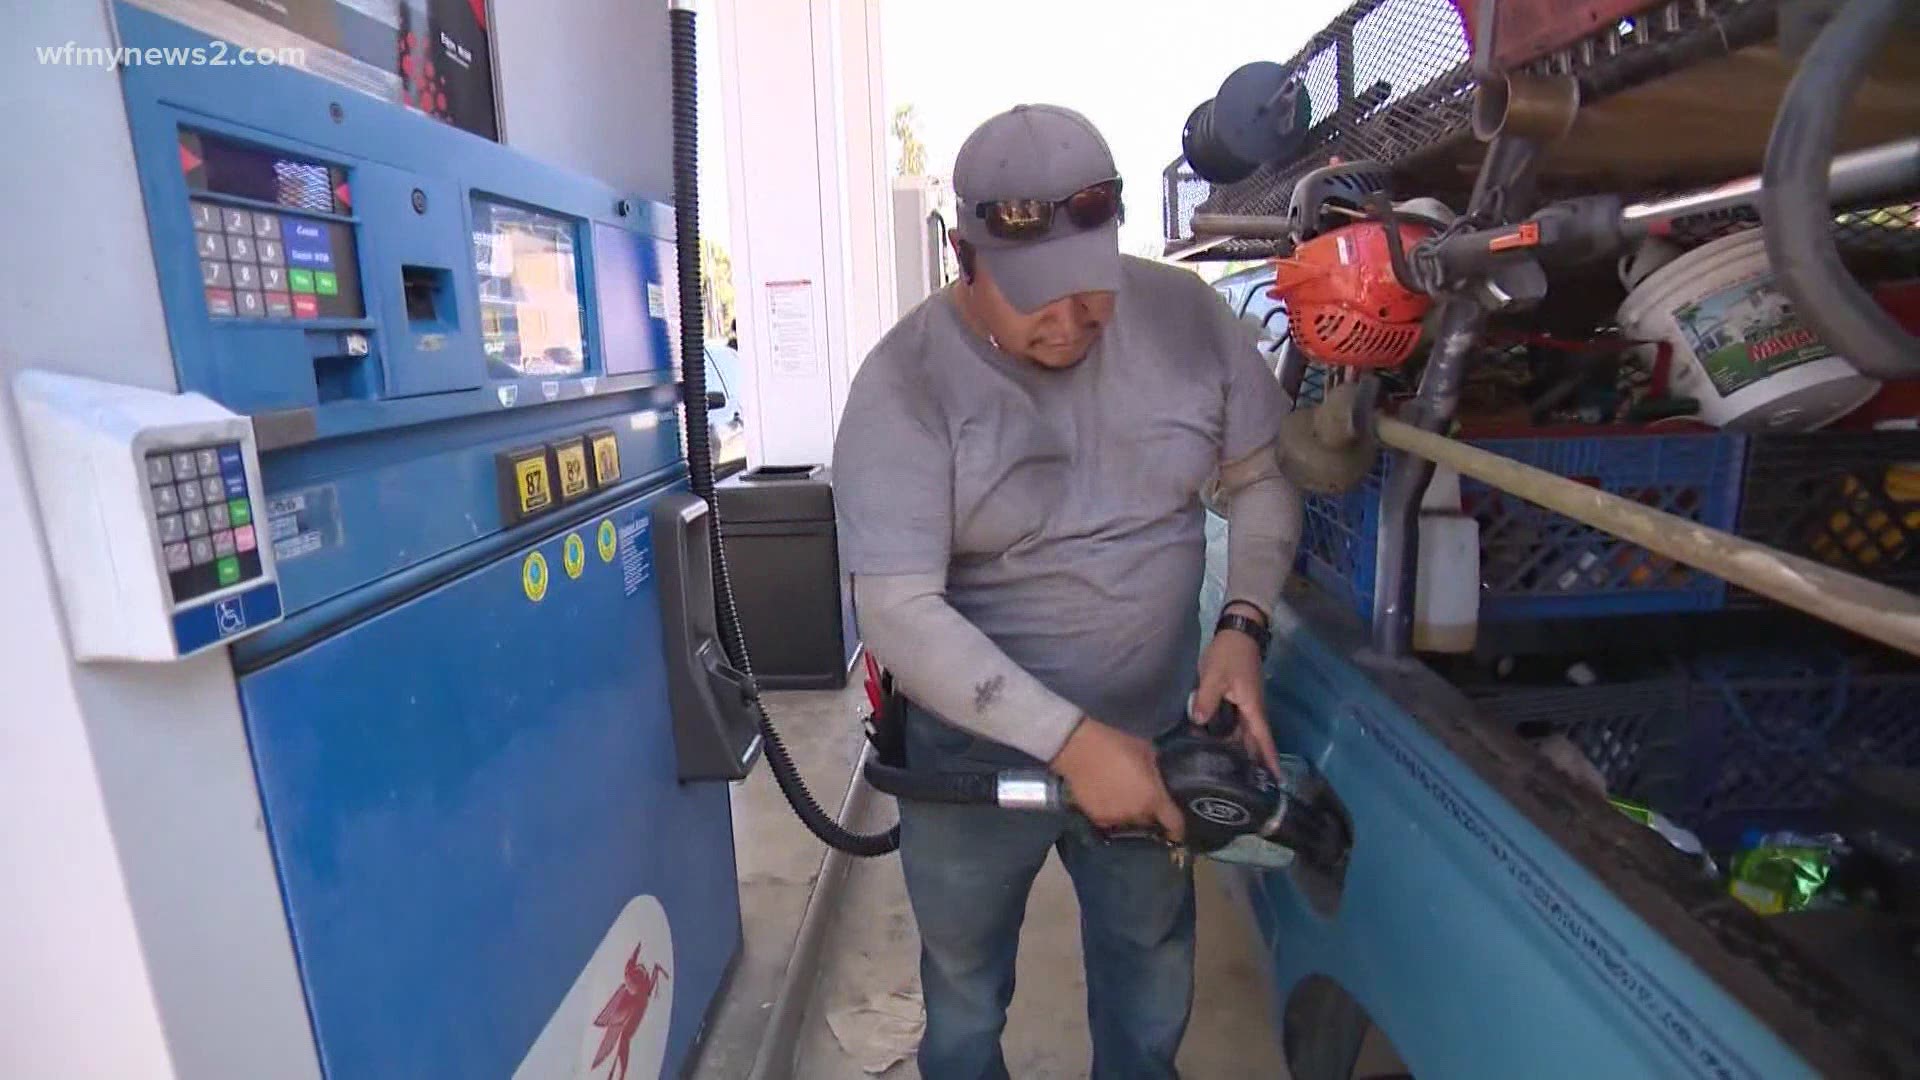 The fuel company made a mistake, putting diesel fuel where premium gasoline should've been.